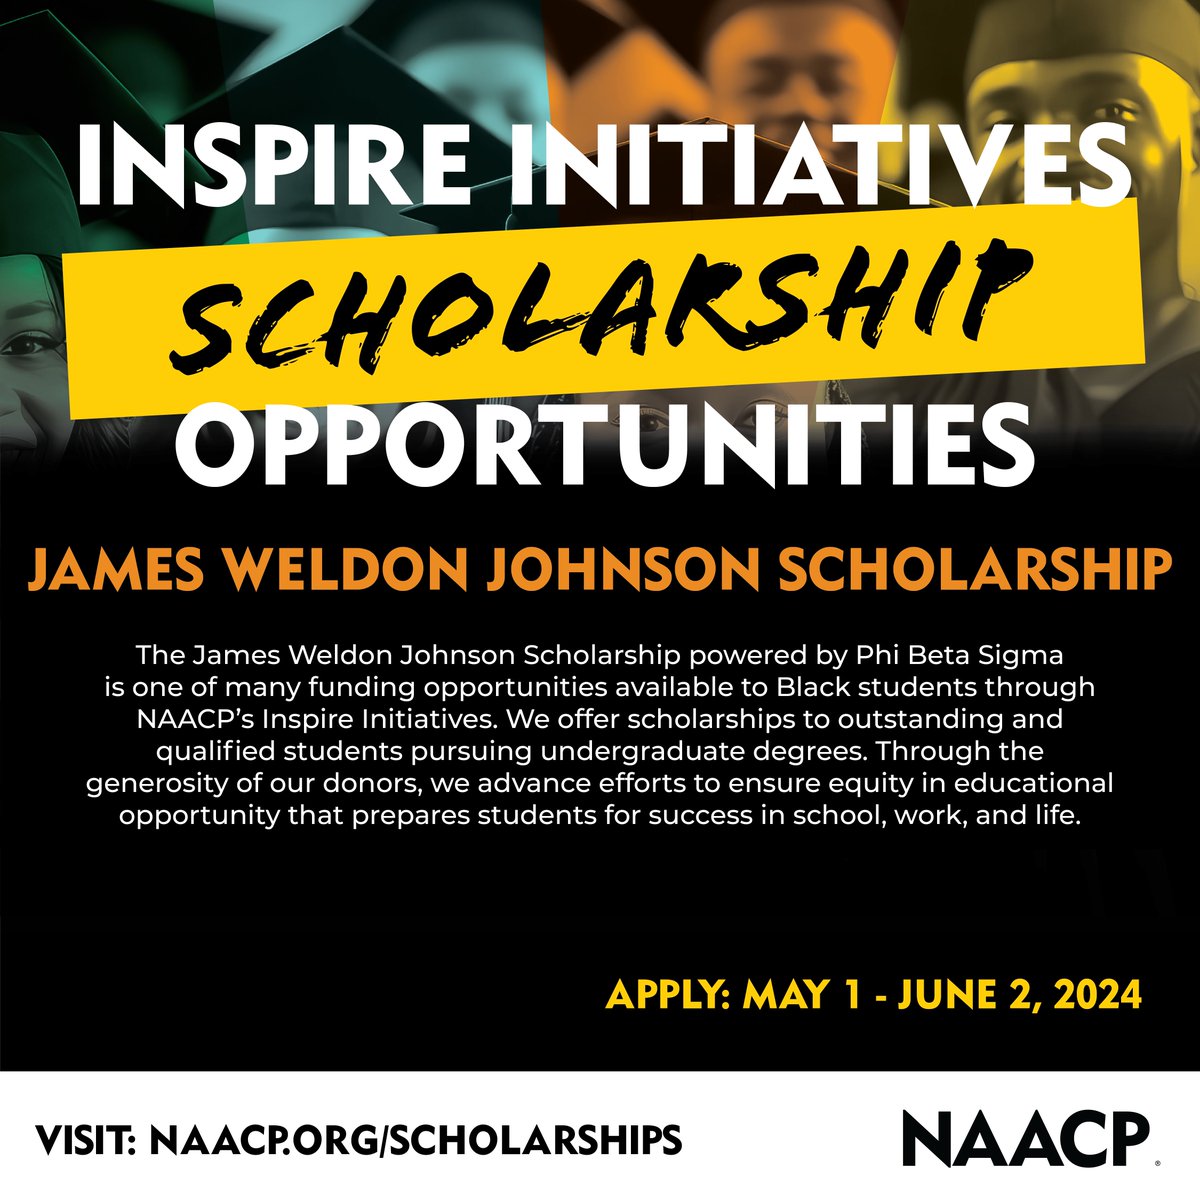 Thanks to our generous donors, we have a range of scholarships designed to support Black students and students of color who are pursuing undergraduate or graduate school. Learn more about the requirements and apply soon: naacp.org/scholarships 📅 Deadline: June 2